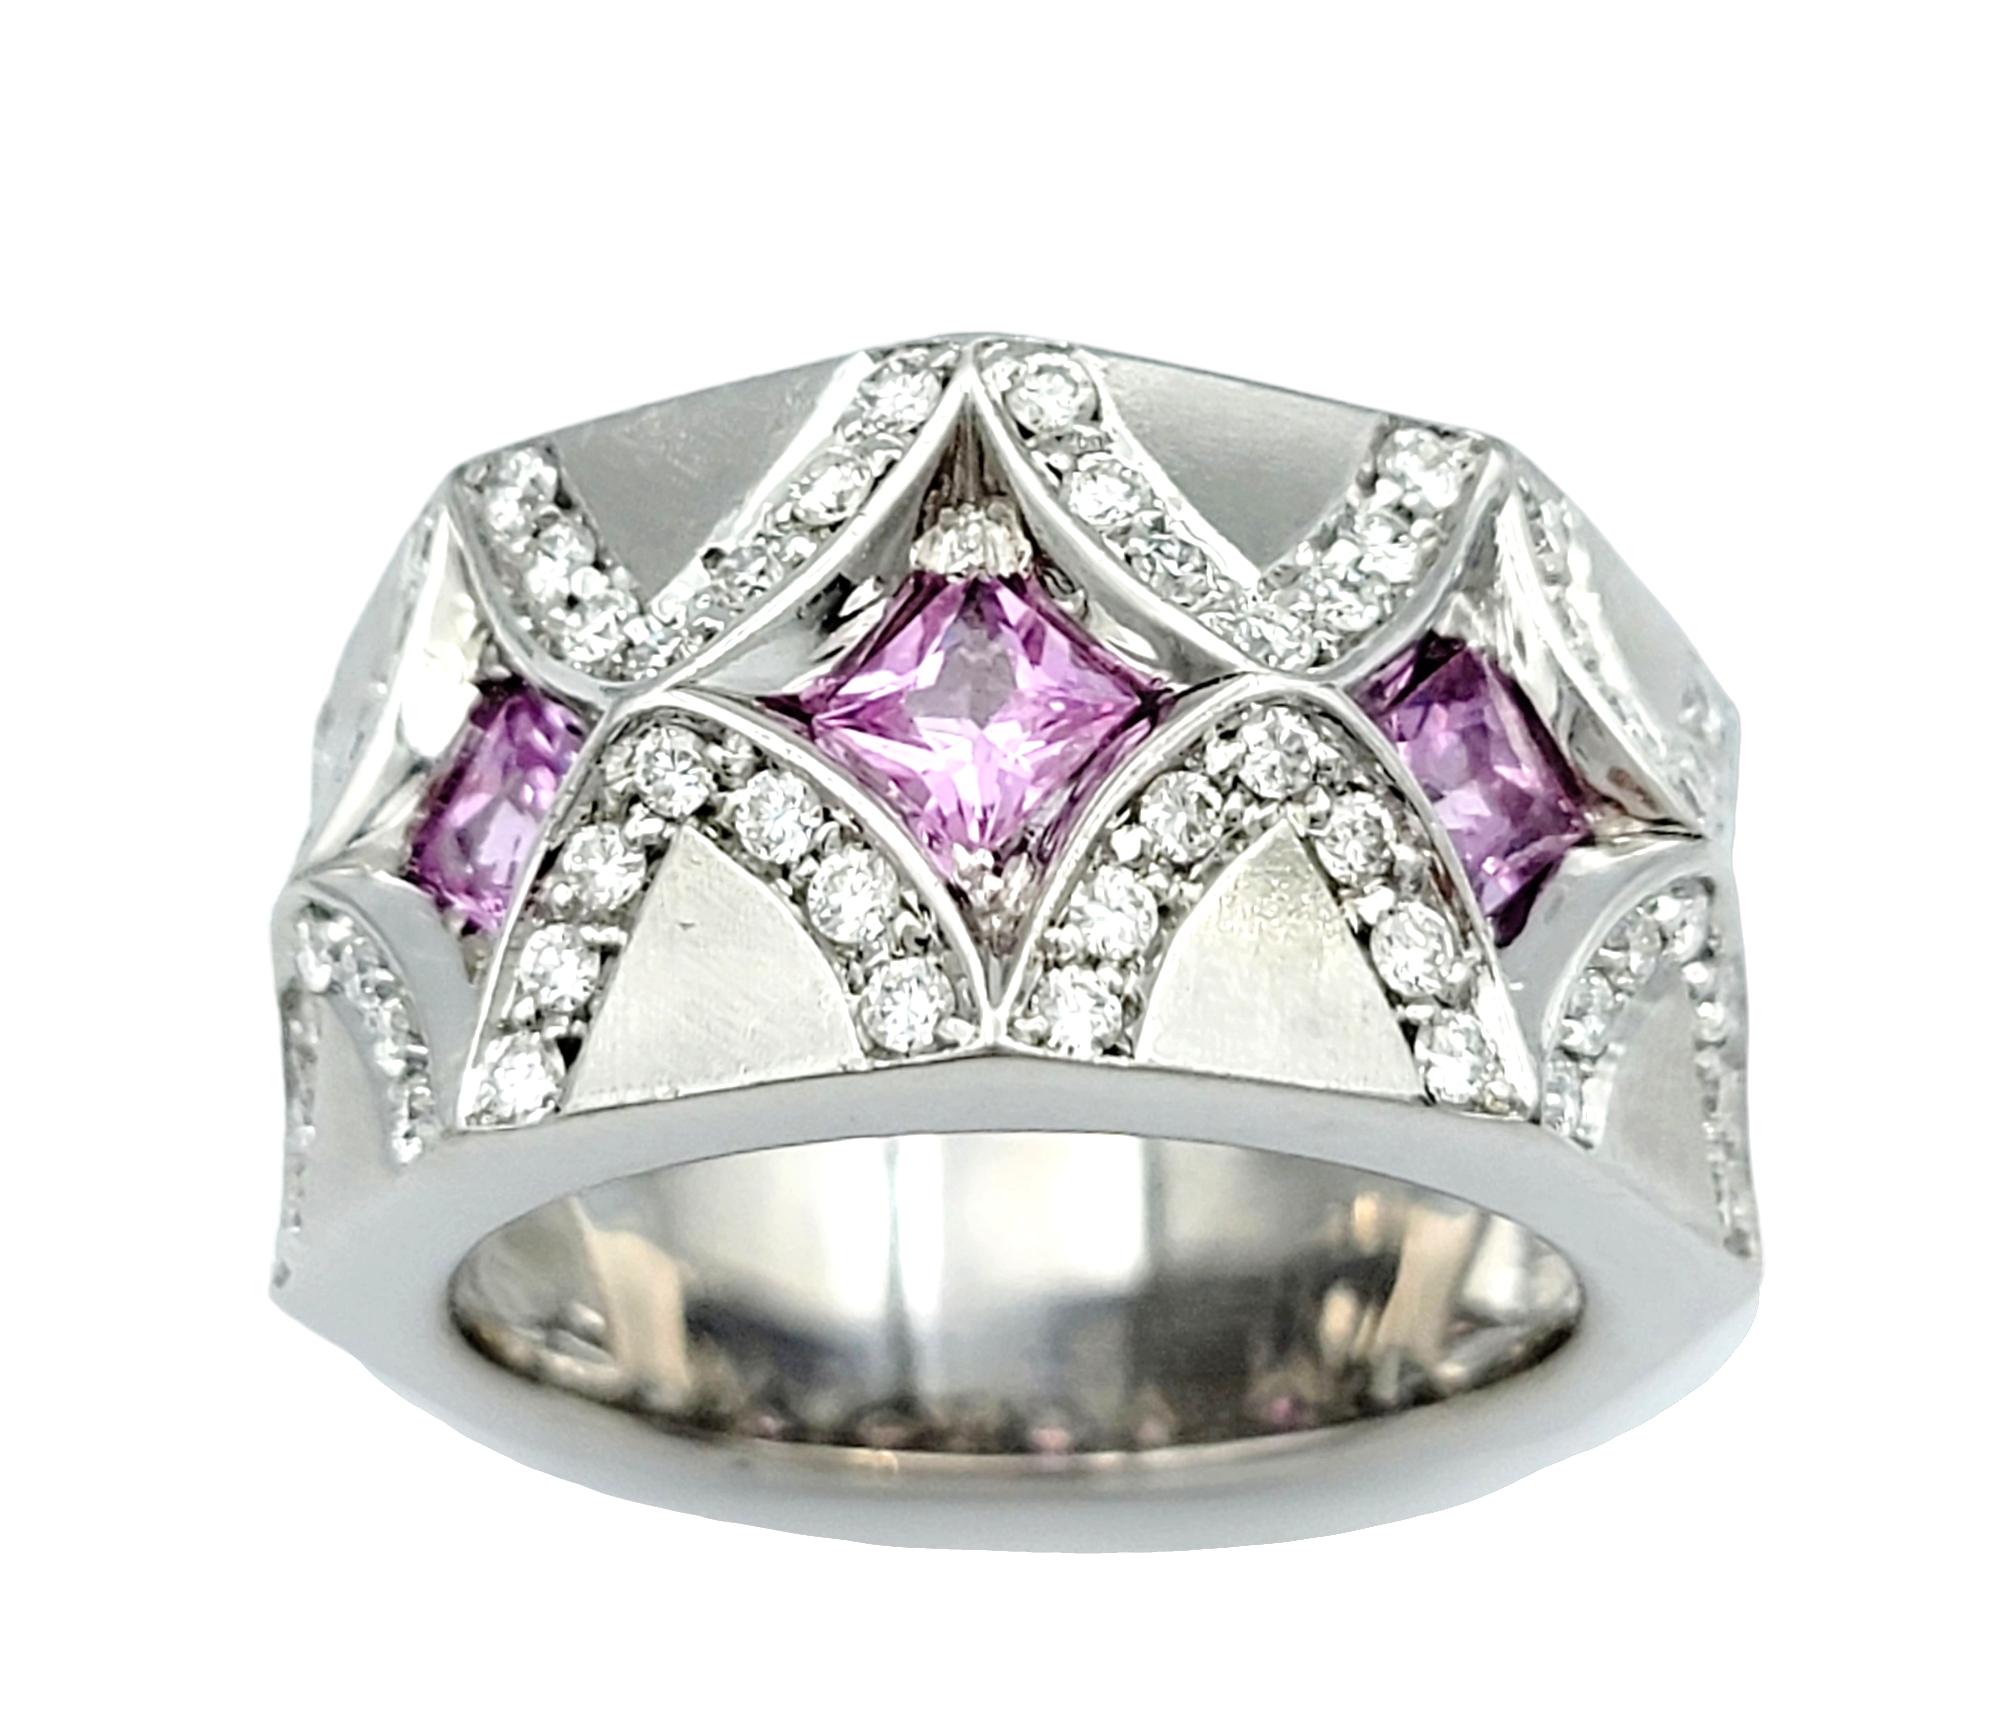 Ring Size: 7.25

Elegance meets originality in this exquisite band ring, a true masterpiece set in 18 karat white gold. This ring consists of five stunning princess-cut pink natural sapphires, set along the ring's band. These vibrant pink sapphires